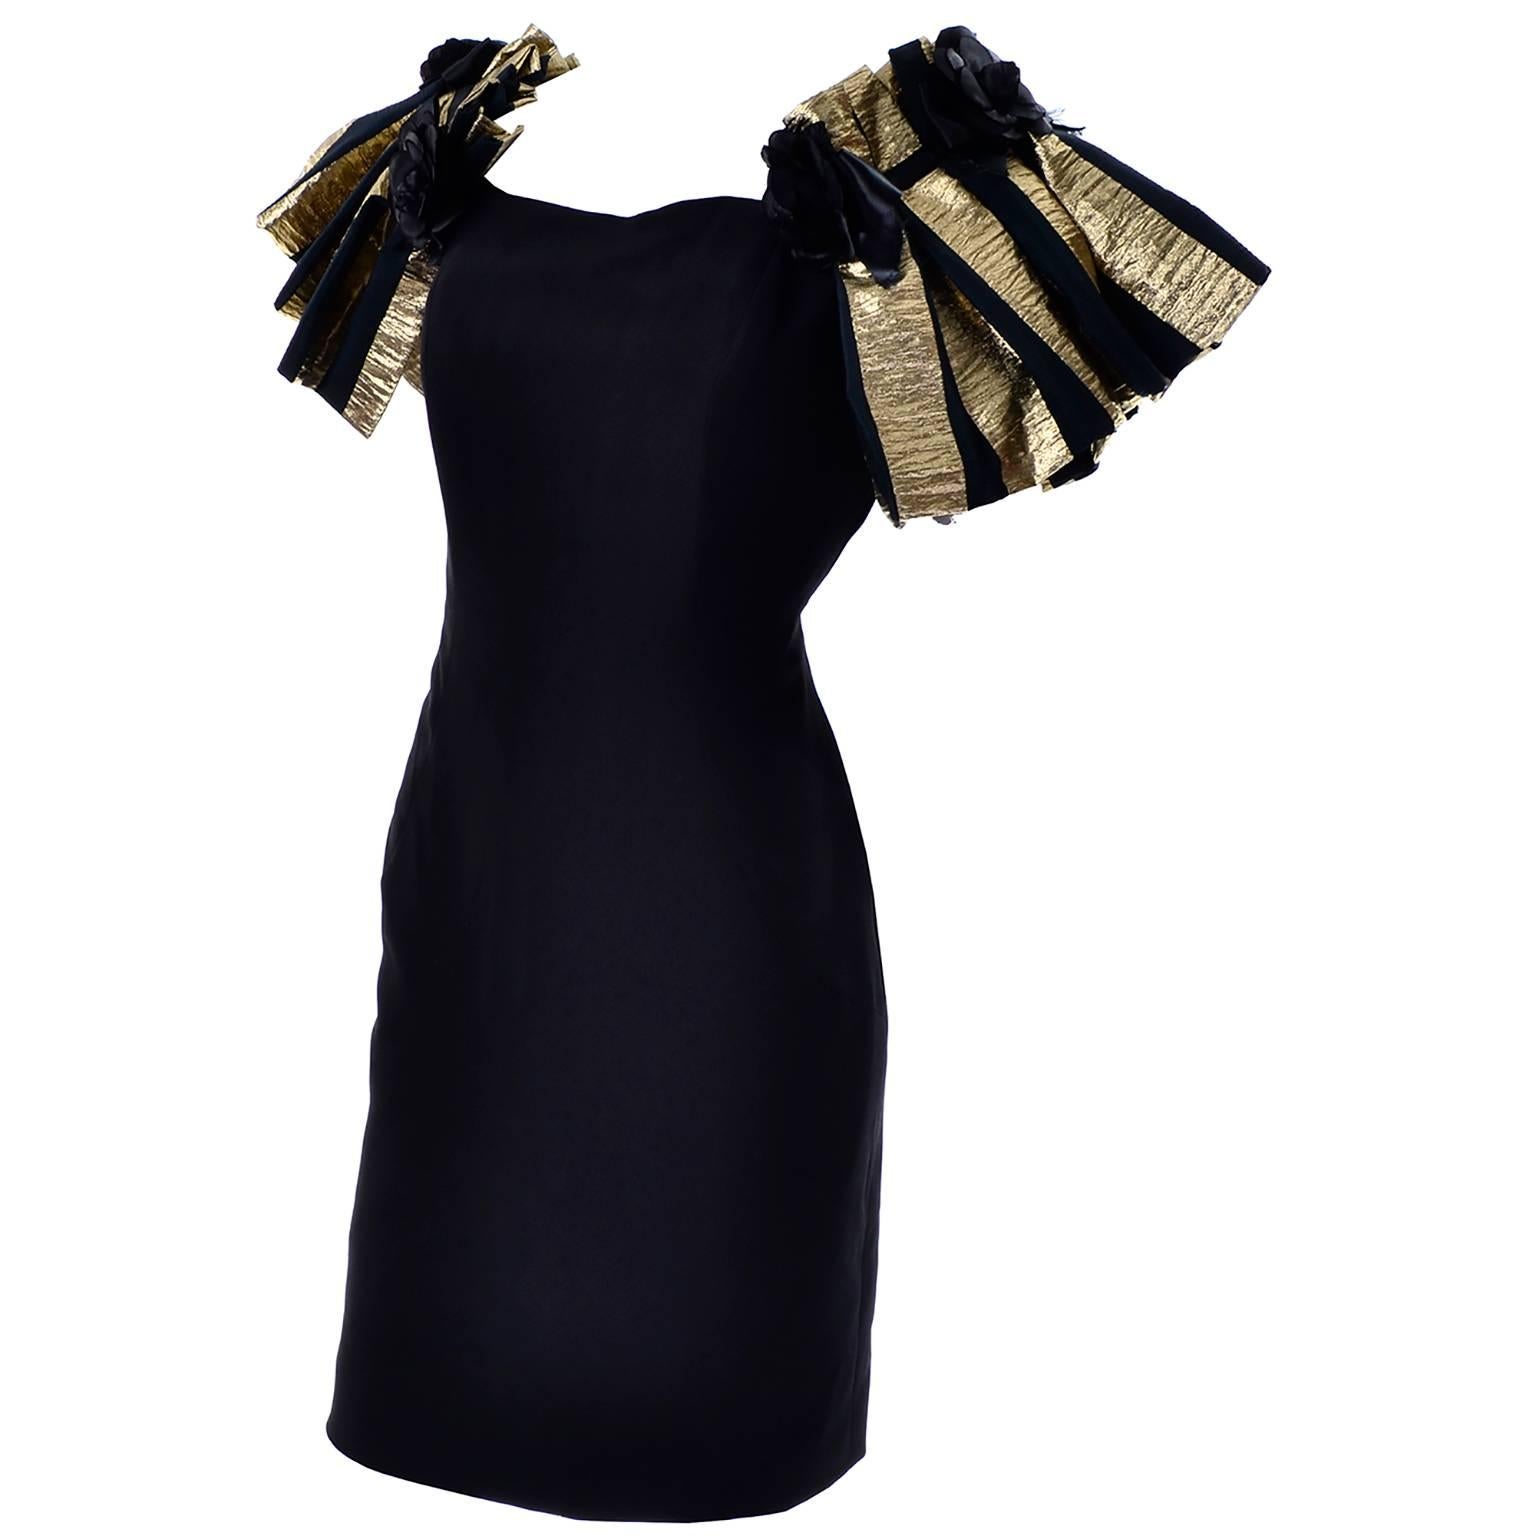 This is a stunning 1980's vintage little black dress by Victor Costa with incredible metallic gold striped sleeves. The straps are elastic underneath, with rose details in a band across the top. There is boning in the bodice, and the dress is fully